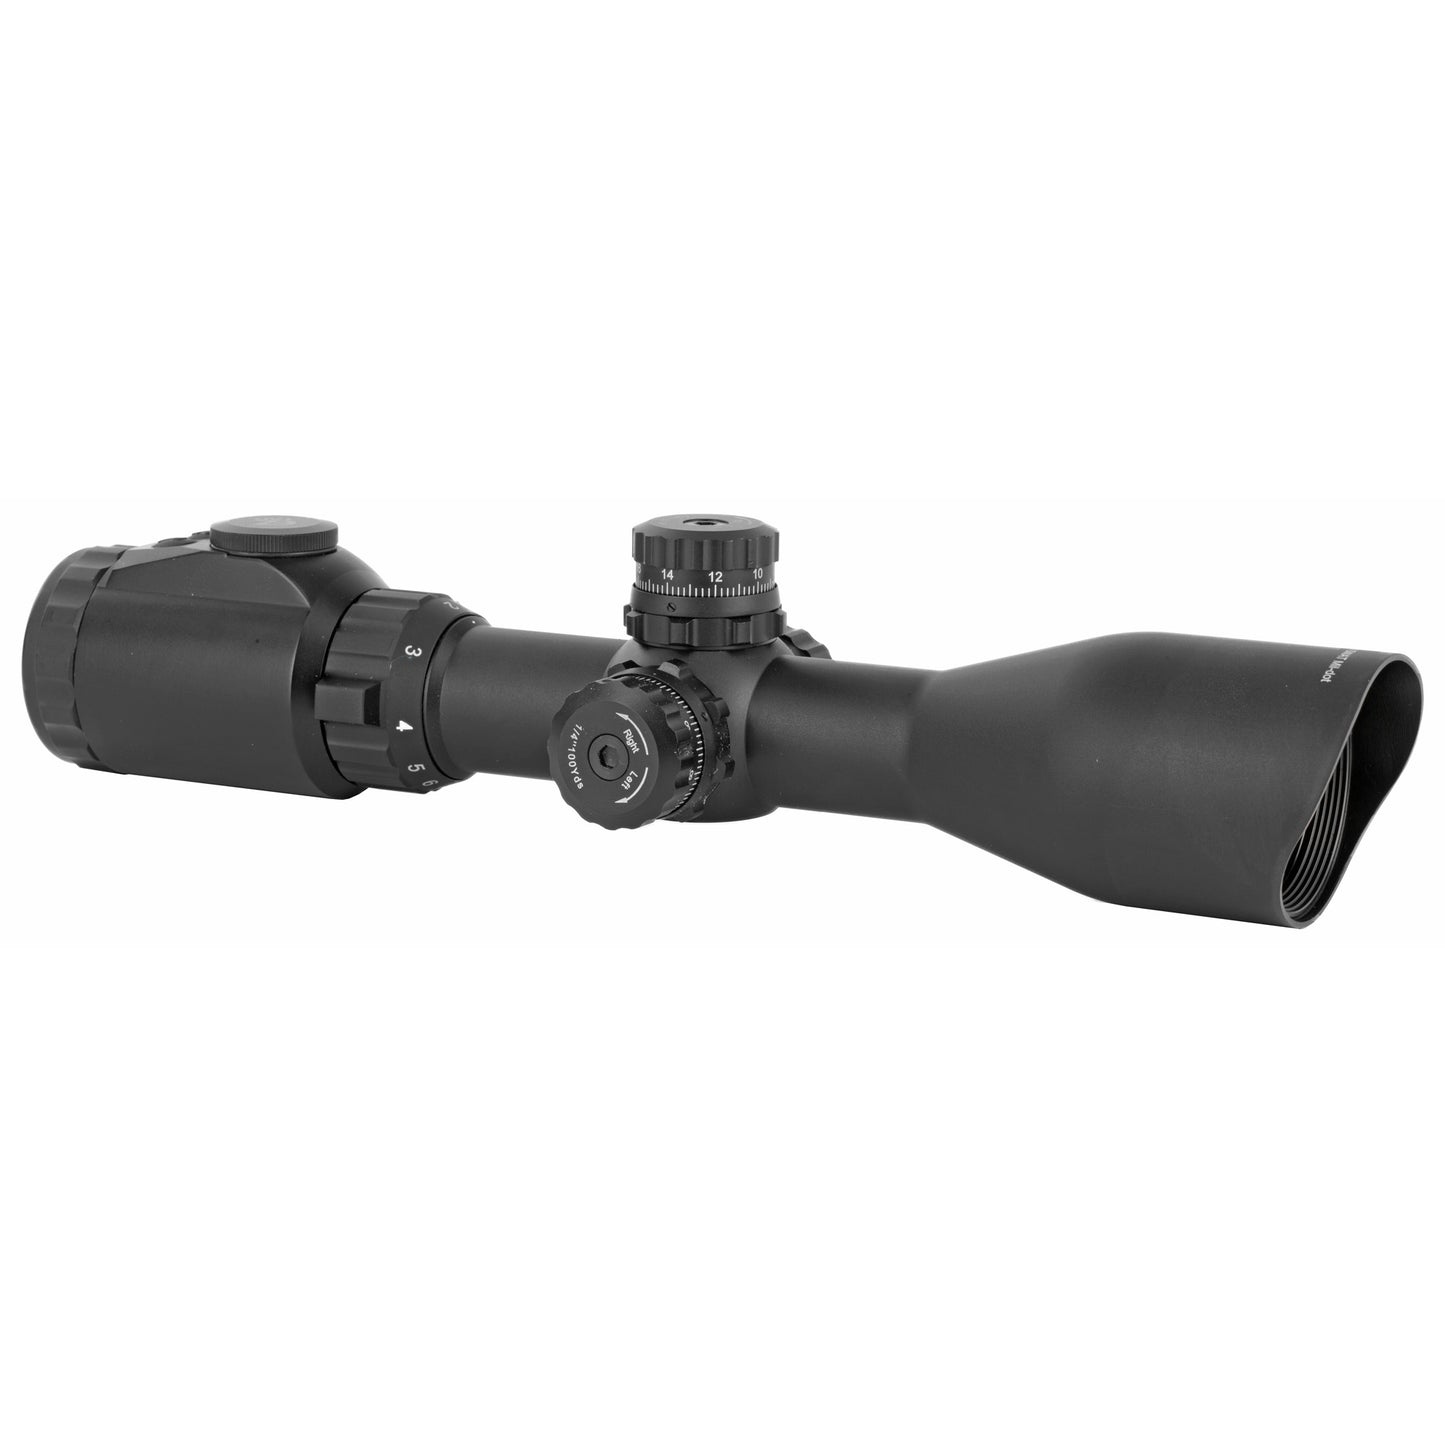 Leapers Inc UTG AccuShot Scope 2-7x44 36-Color Mil-Dot Reticle SCP3-274LAOIEW - California Shooting Supplies